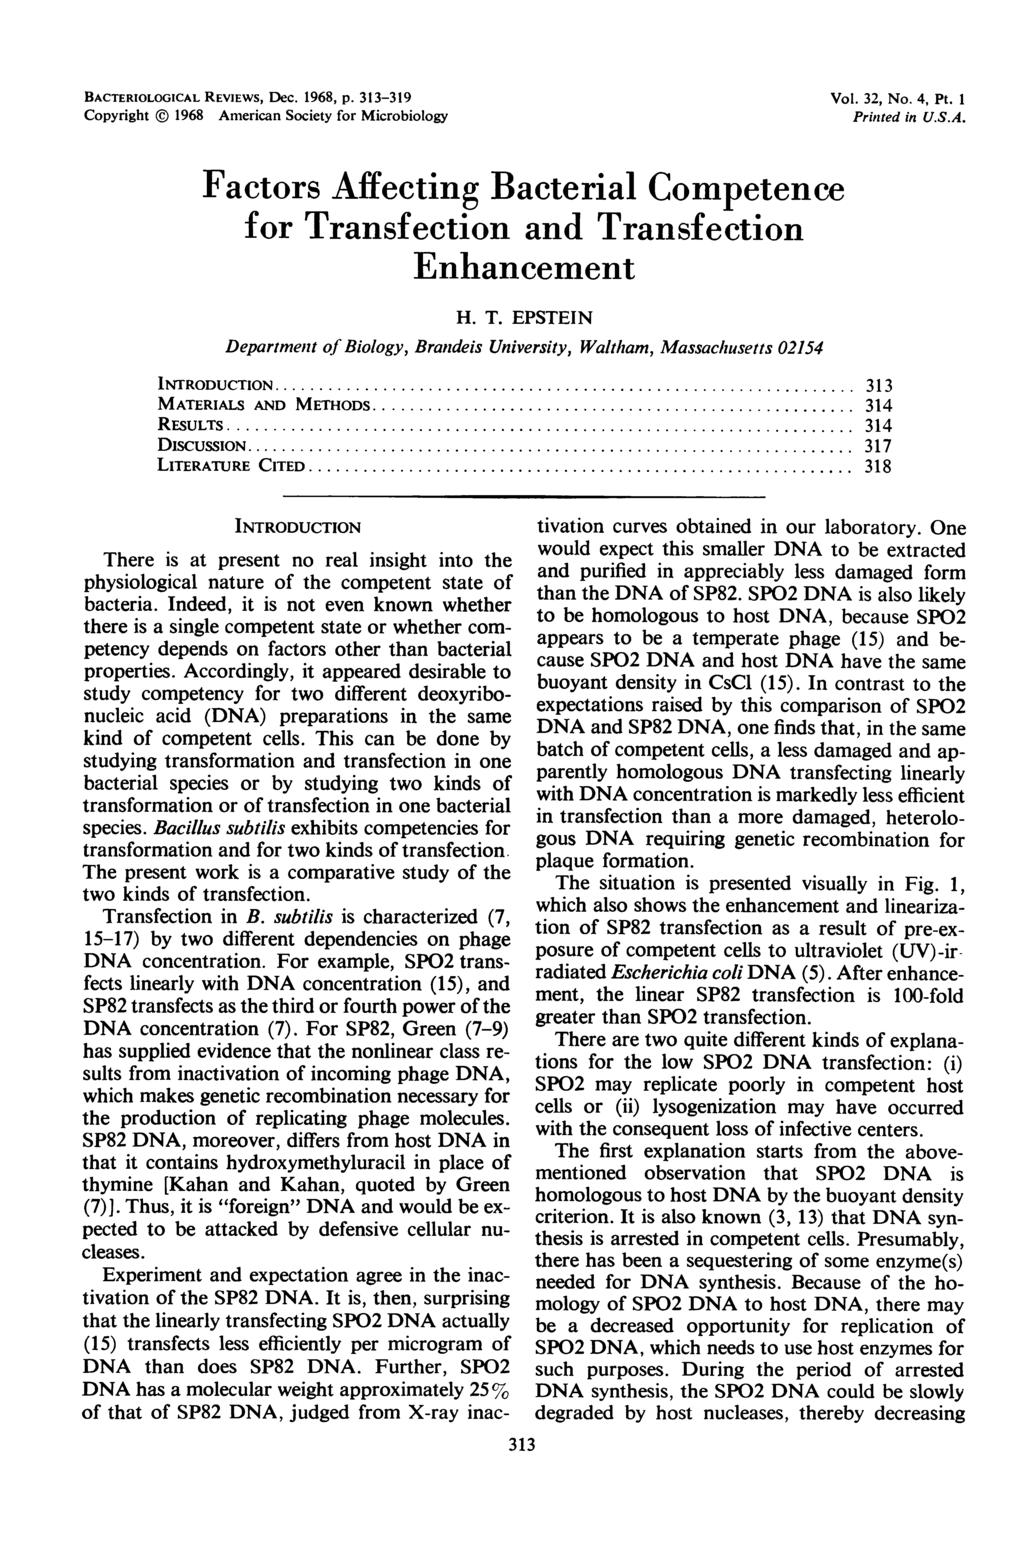 BACTERIOLOGICAL REVIEWS, Dec. 1968, p. 313-319 Copyright 1968 American Society for Microbiology Vol. 32, No. 4, Pt. 1 Prinited in U.S.A. Factors Affecting Bacterial Competence for Transfection and Transfection Enhancement H.